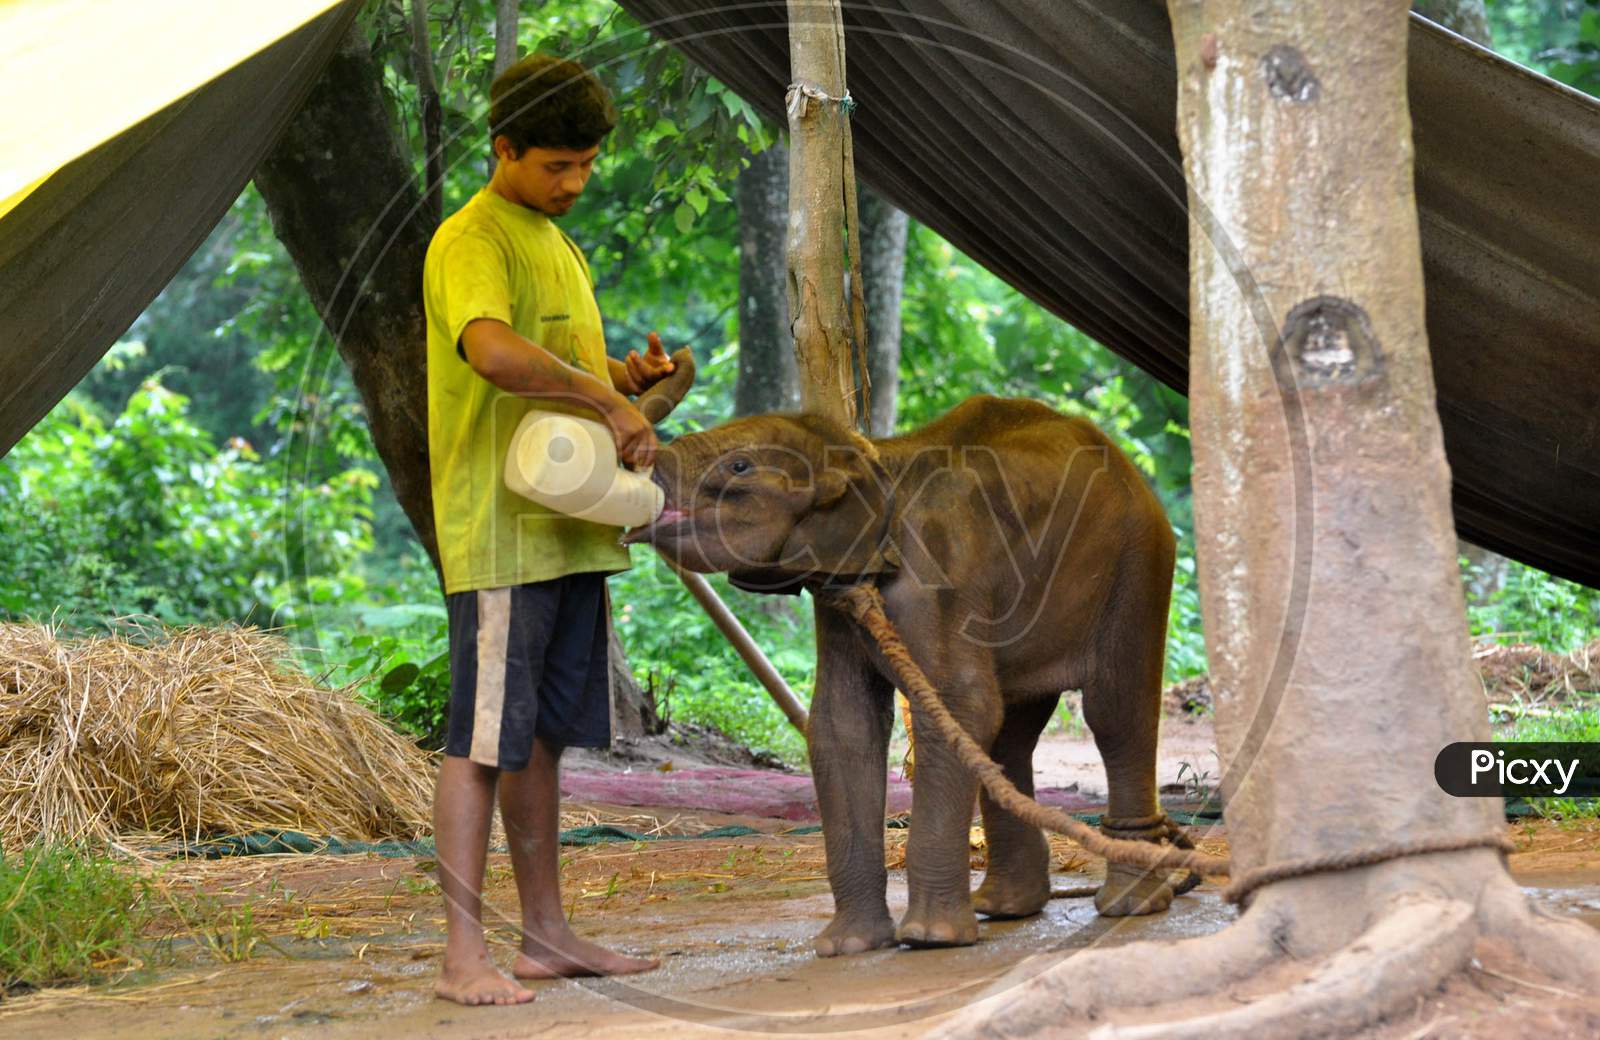 Baby elephant being fed milk by an animal keeper during the lockdown in a zoo at Guwahati, Assam on July 02, 2020